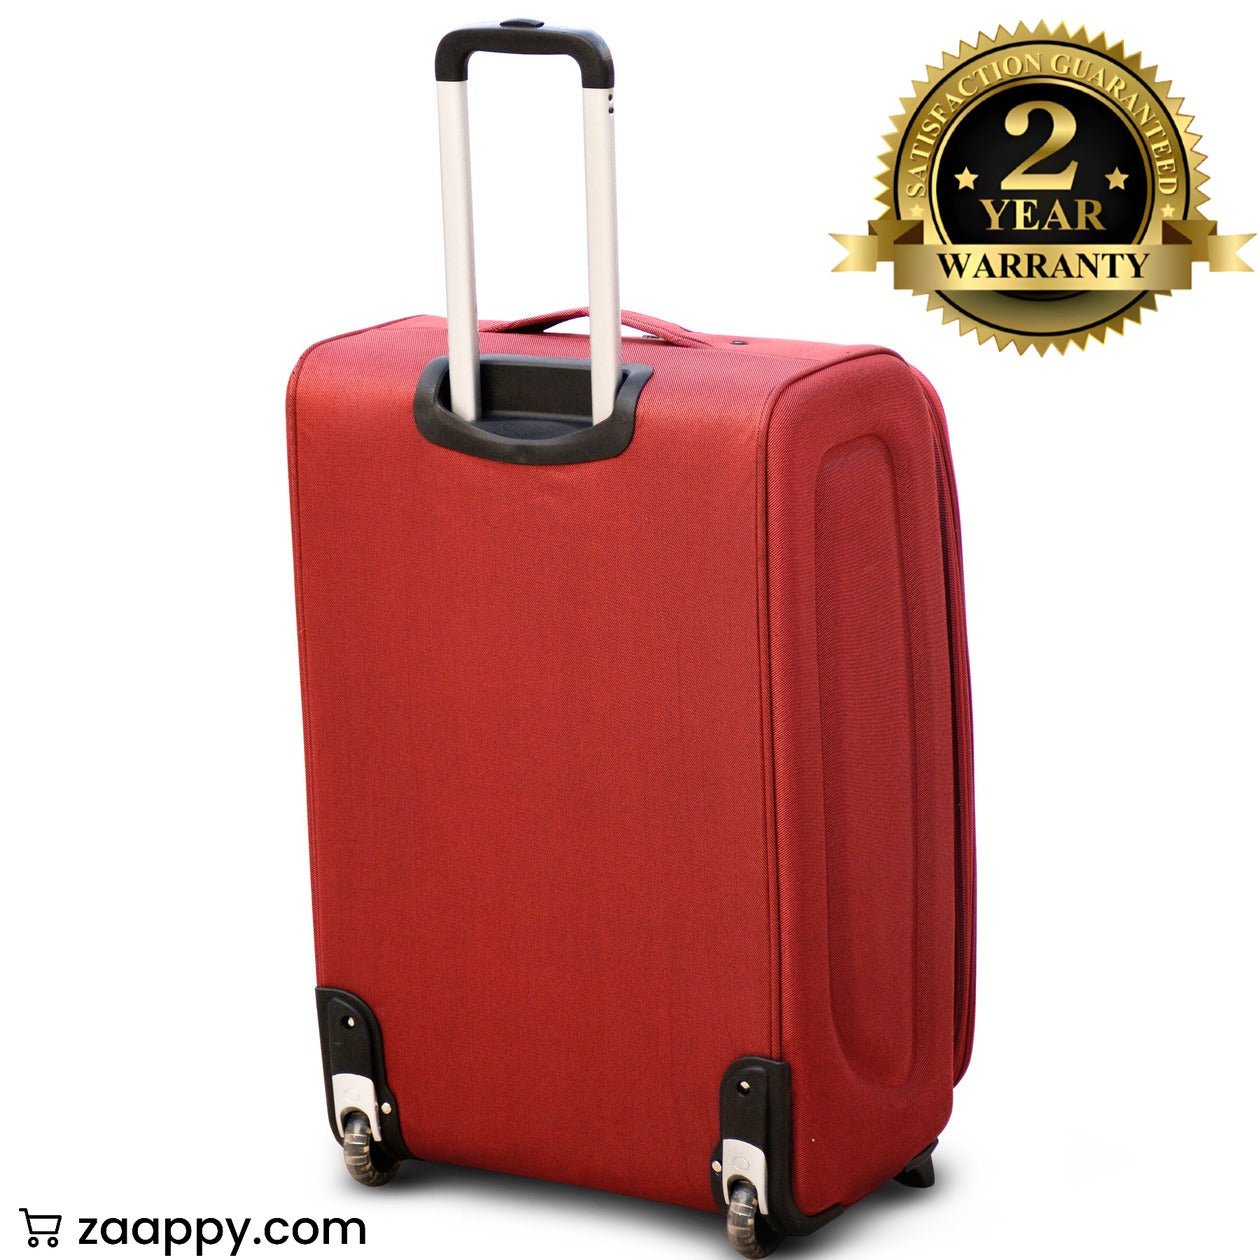 Big Size Lightweight 2 Wheel Soft Material Luggage Bag | 32" Size 36-40 Kg Capacity